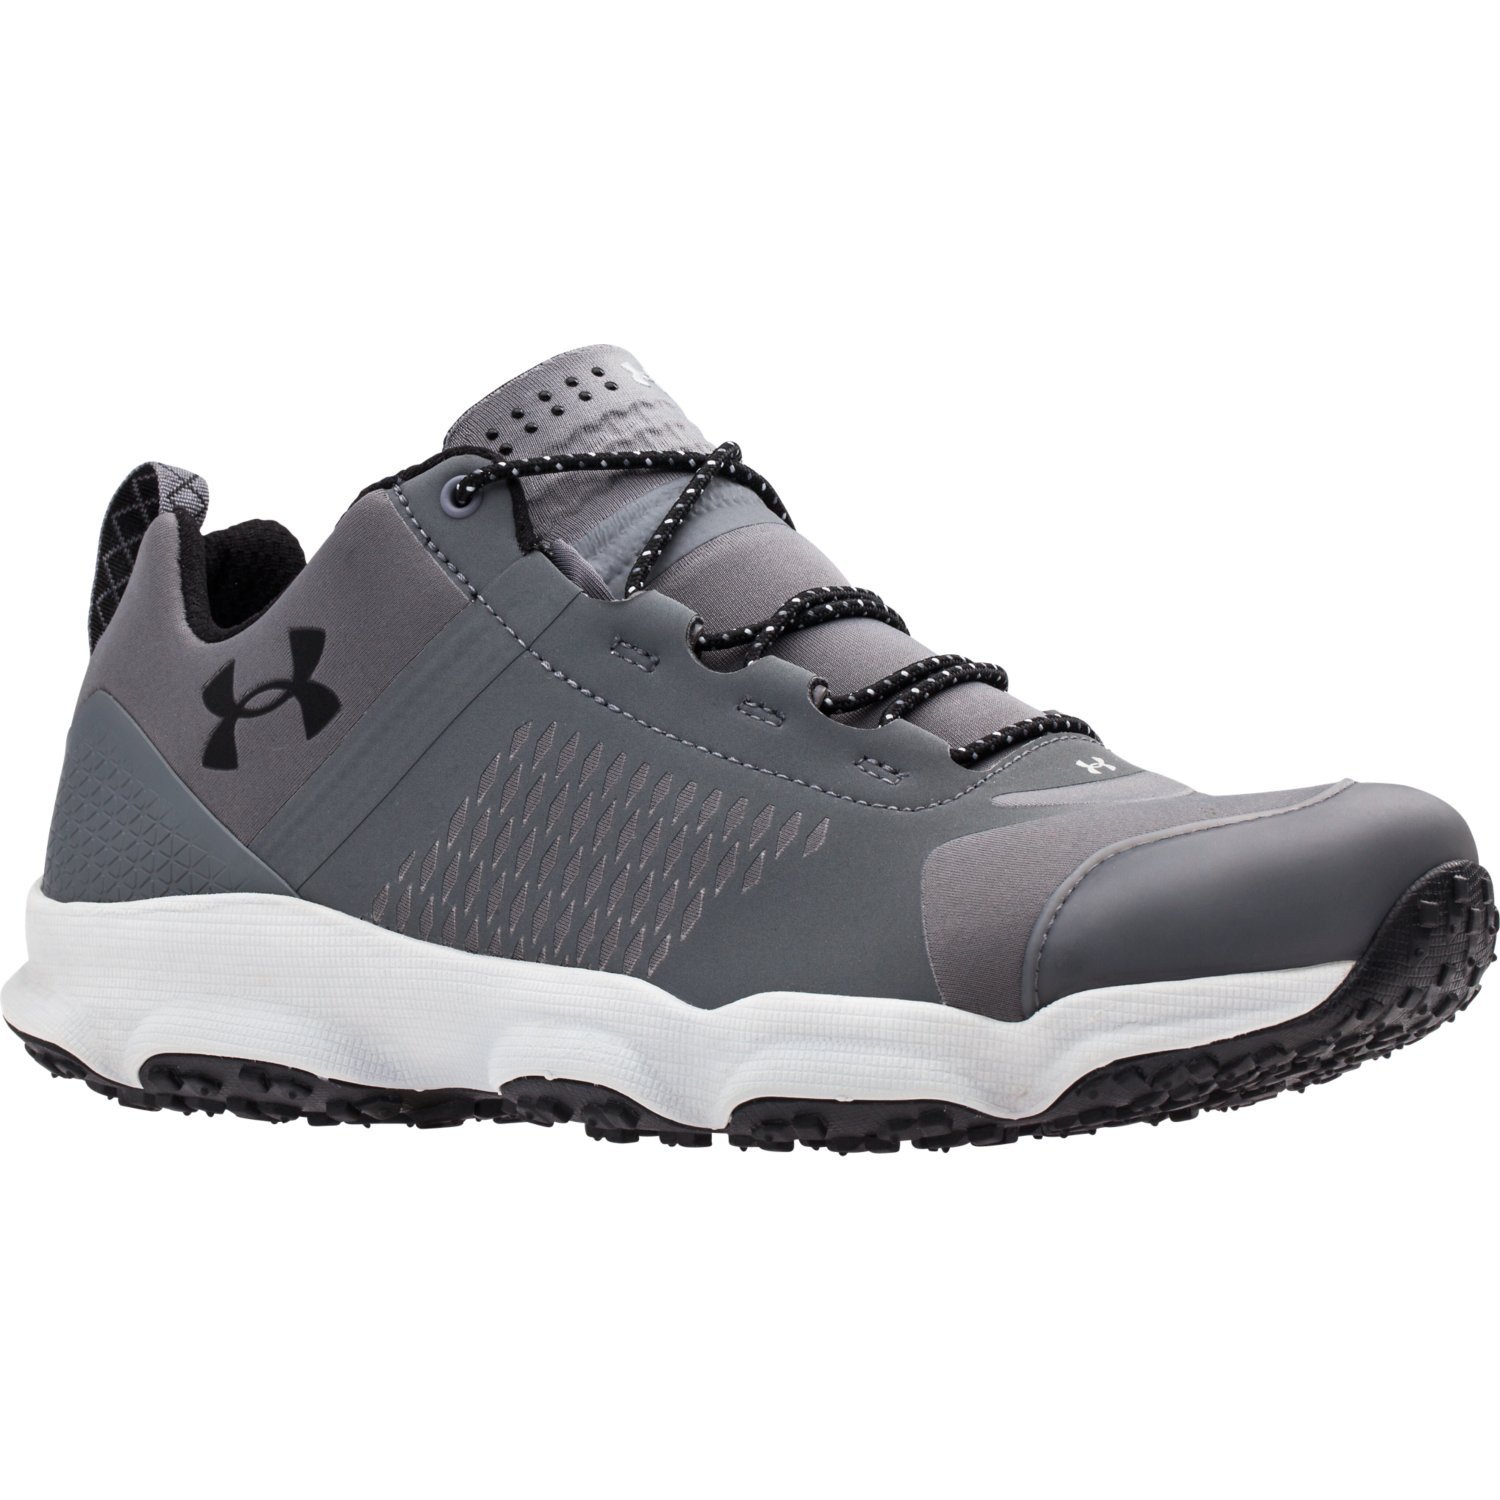 Under Armour Men's SpeedFit Hike Low Hiking Boots | Academy